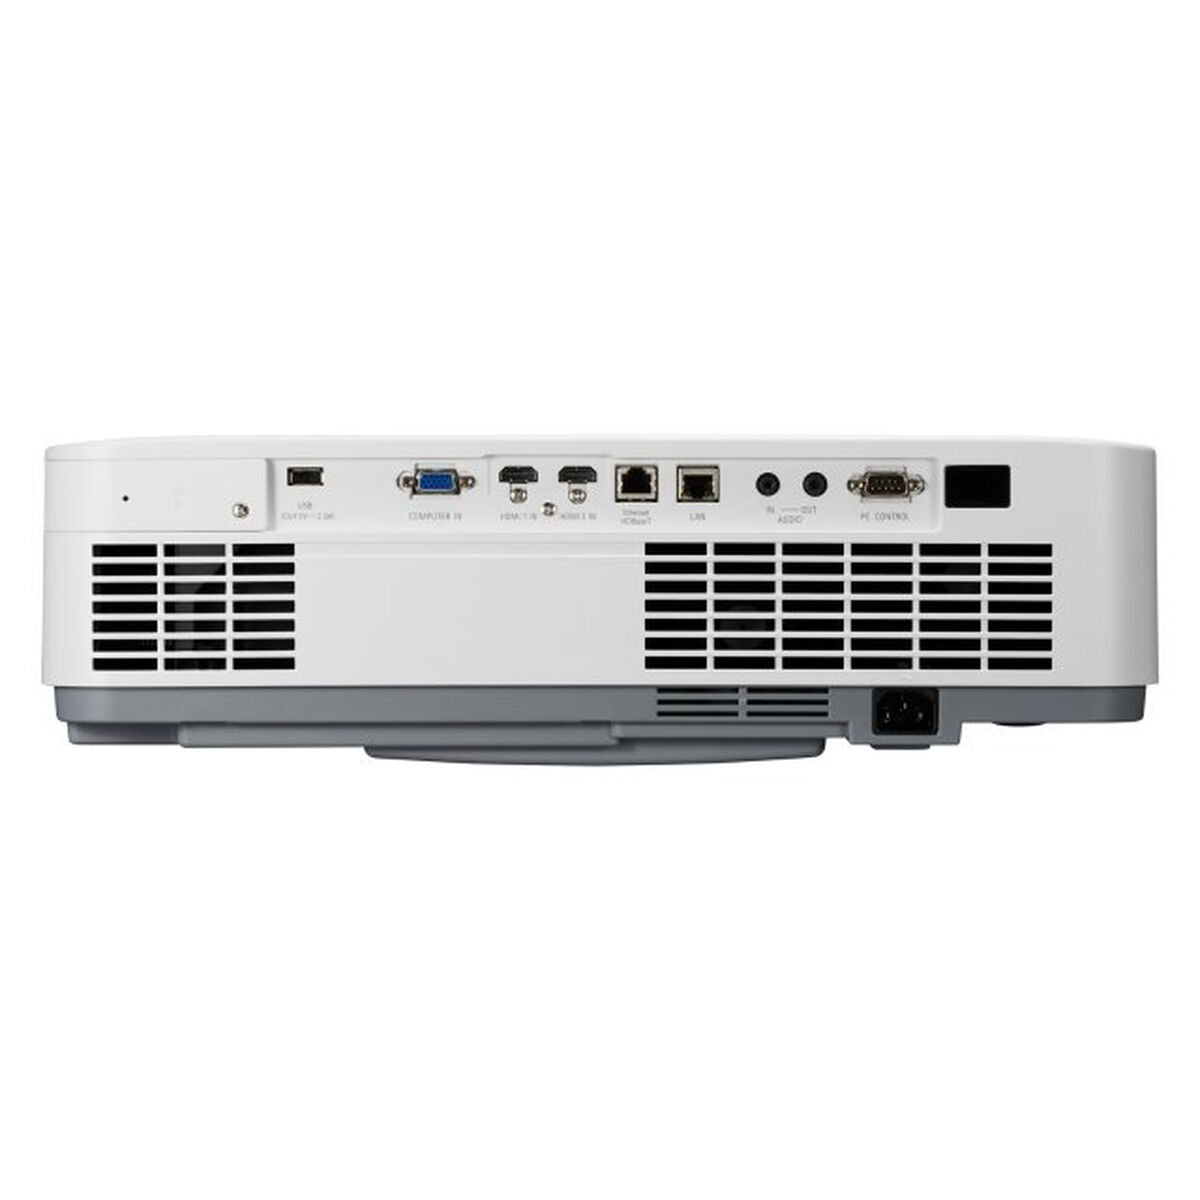 Projector NEC P627UL 6200 Lm